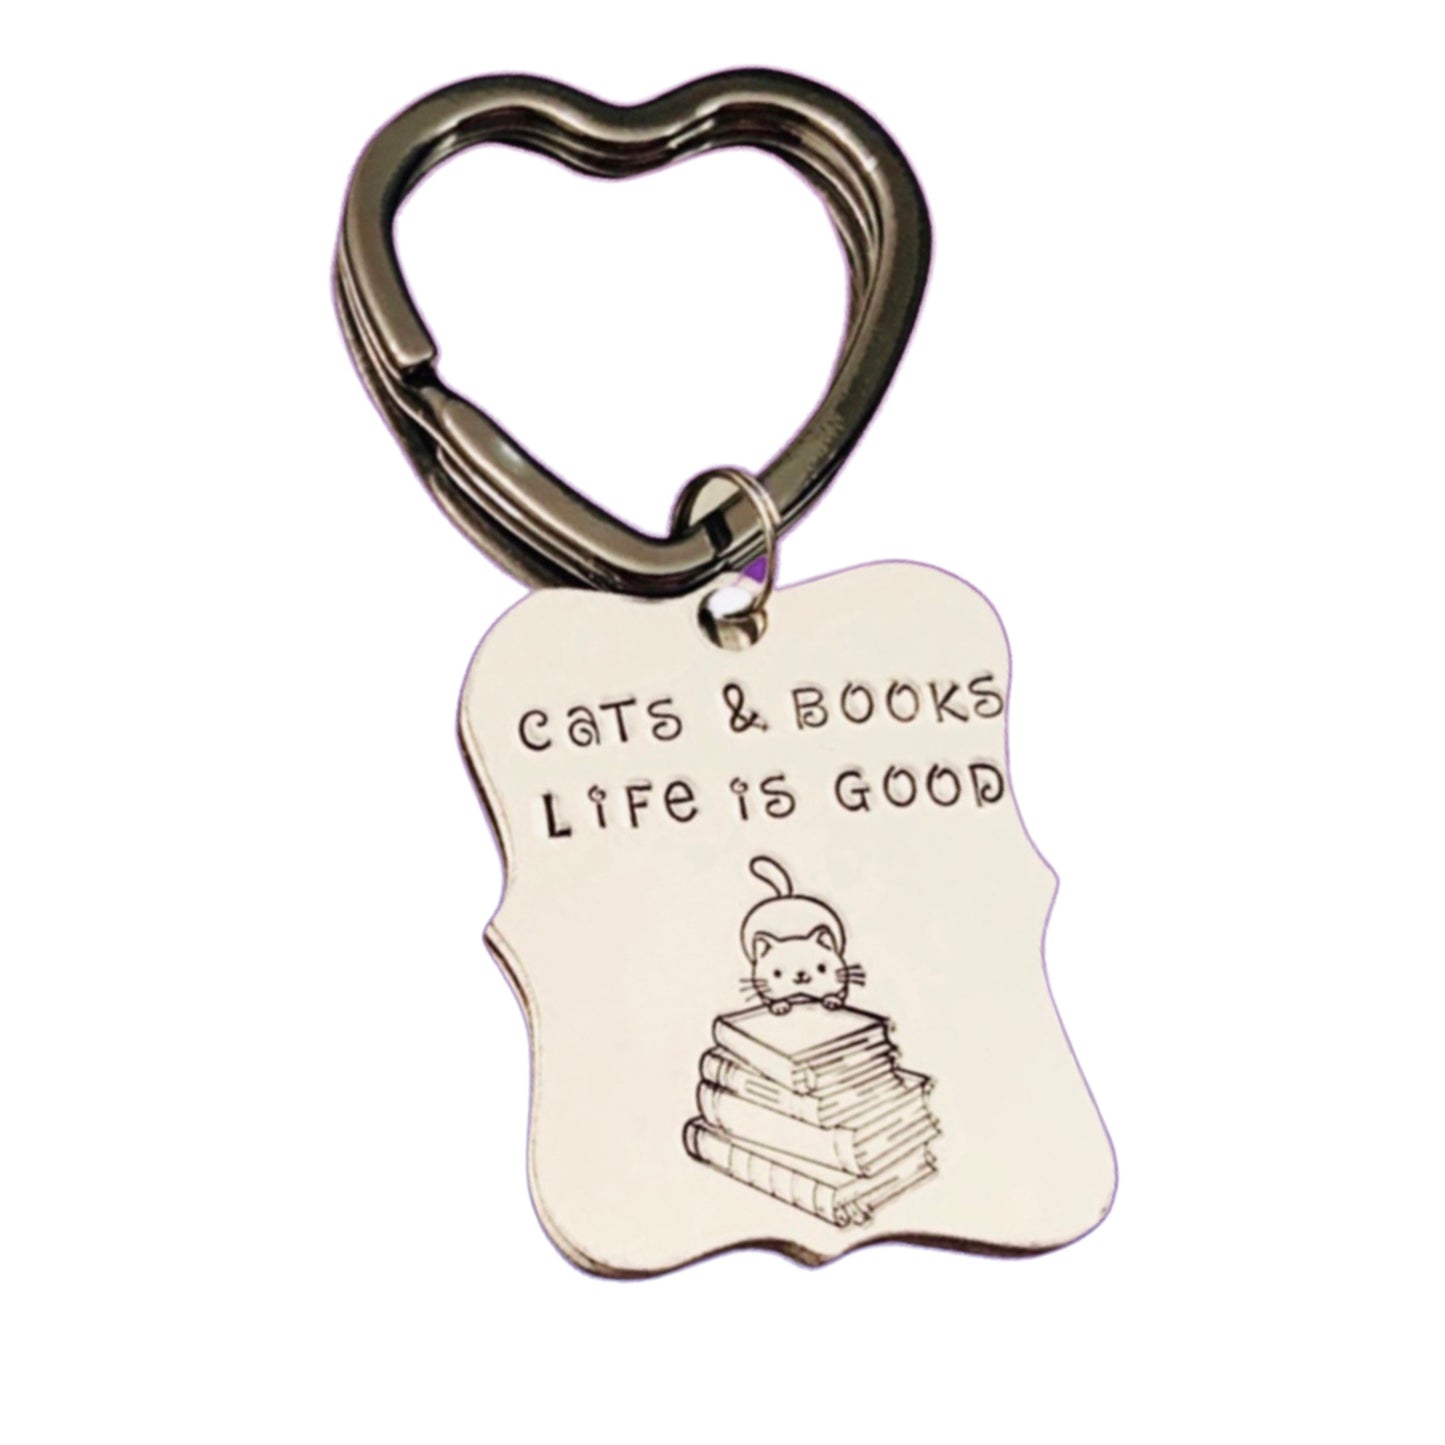 Cats and Books Key Chain